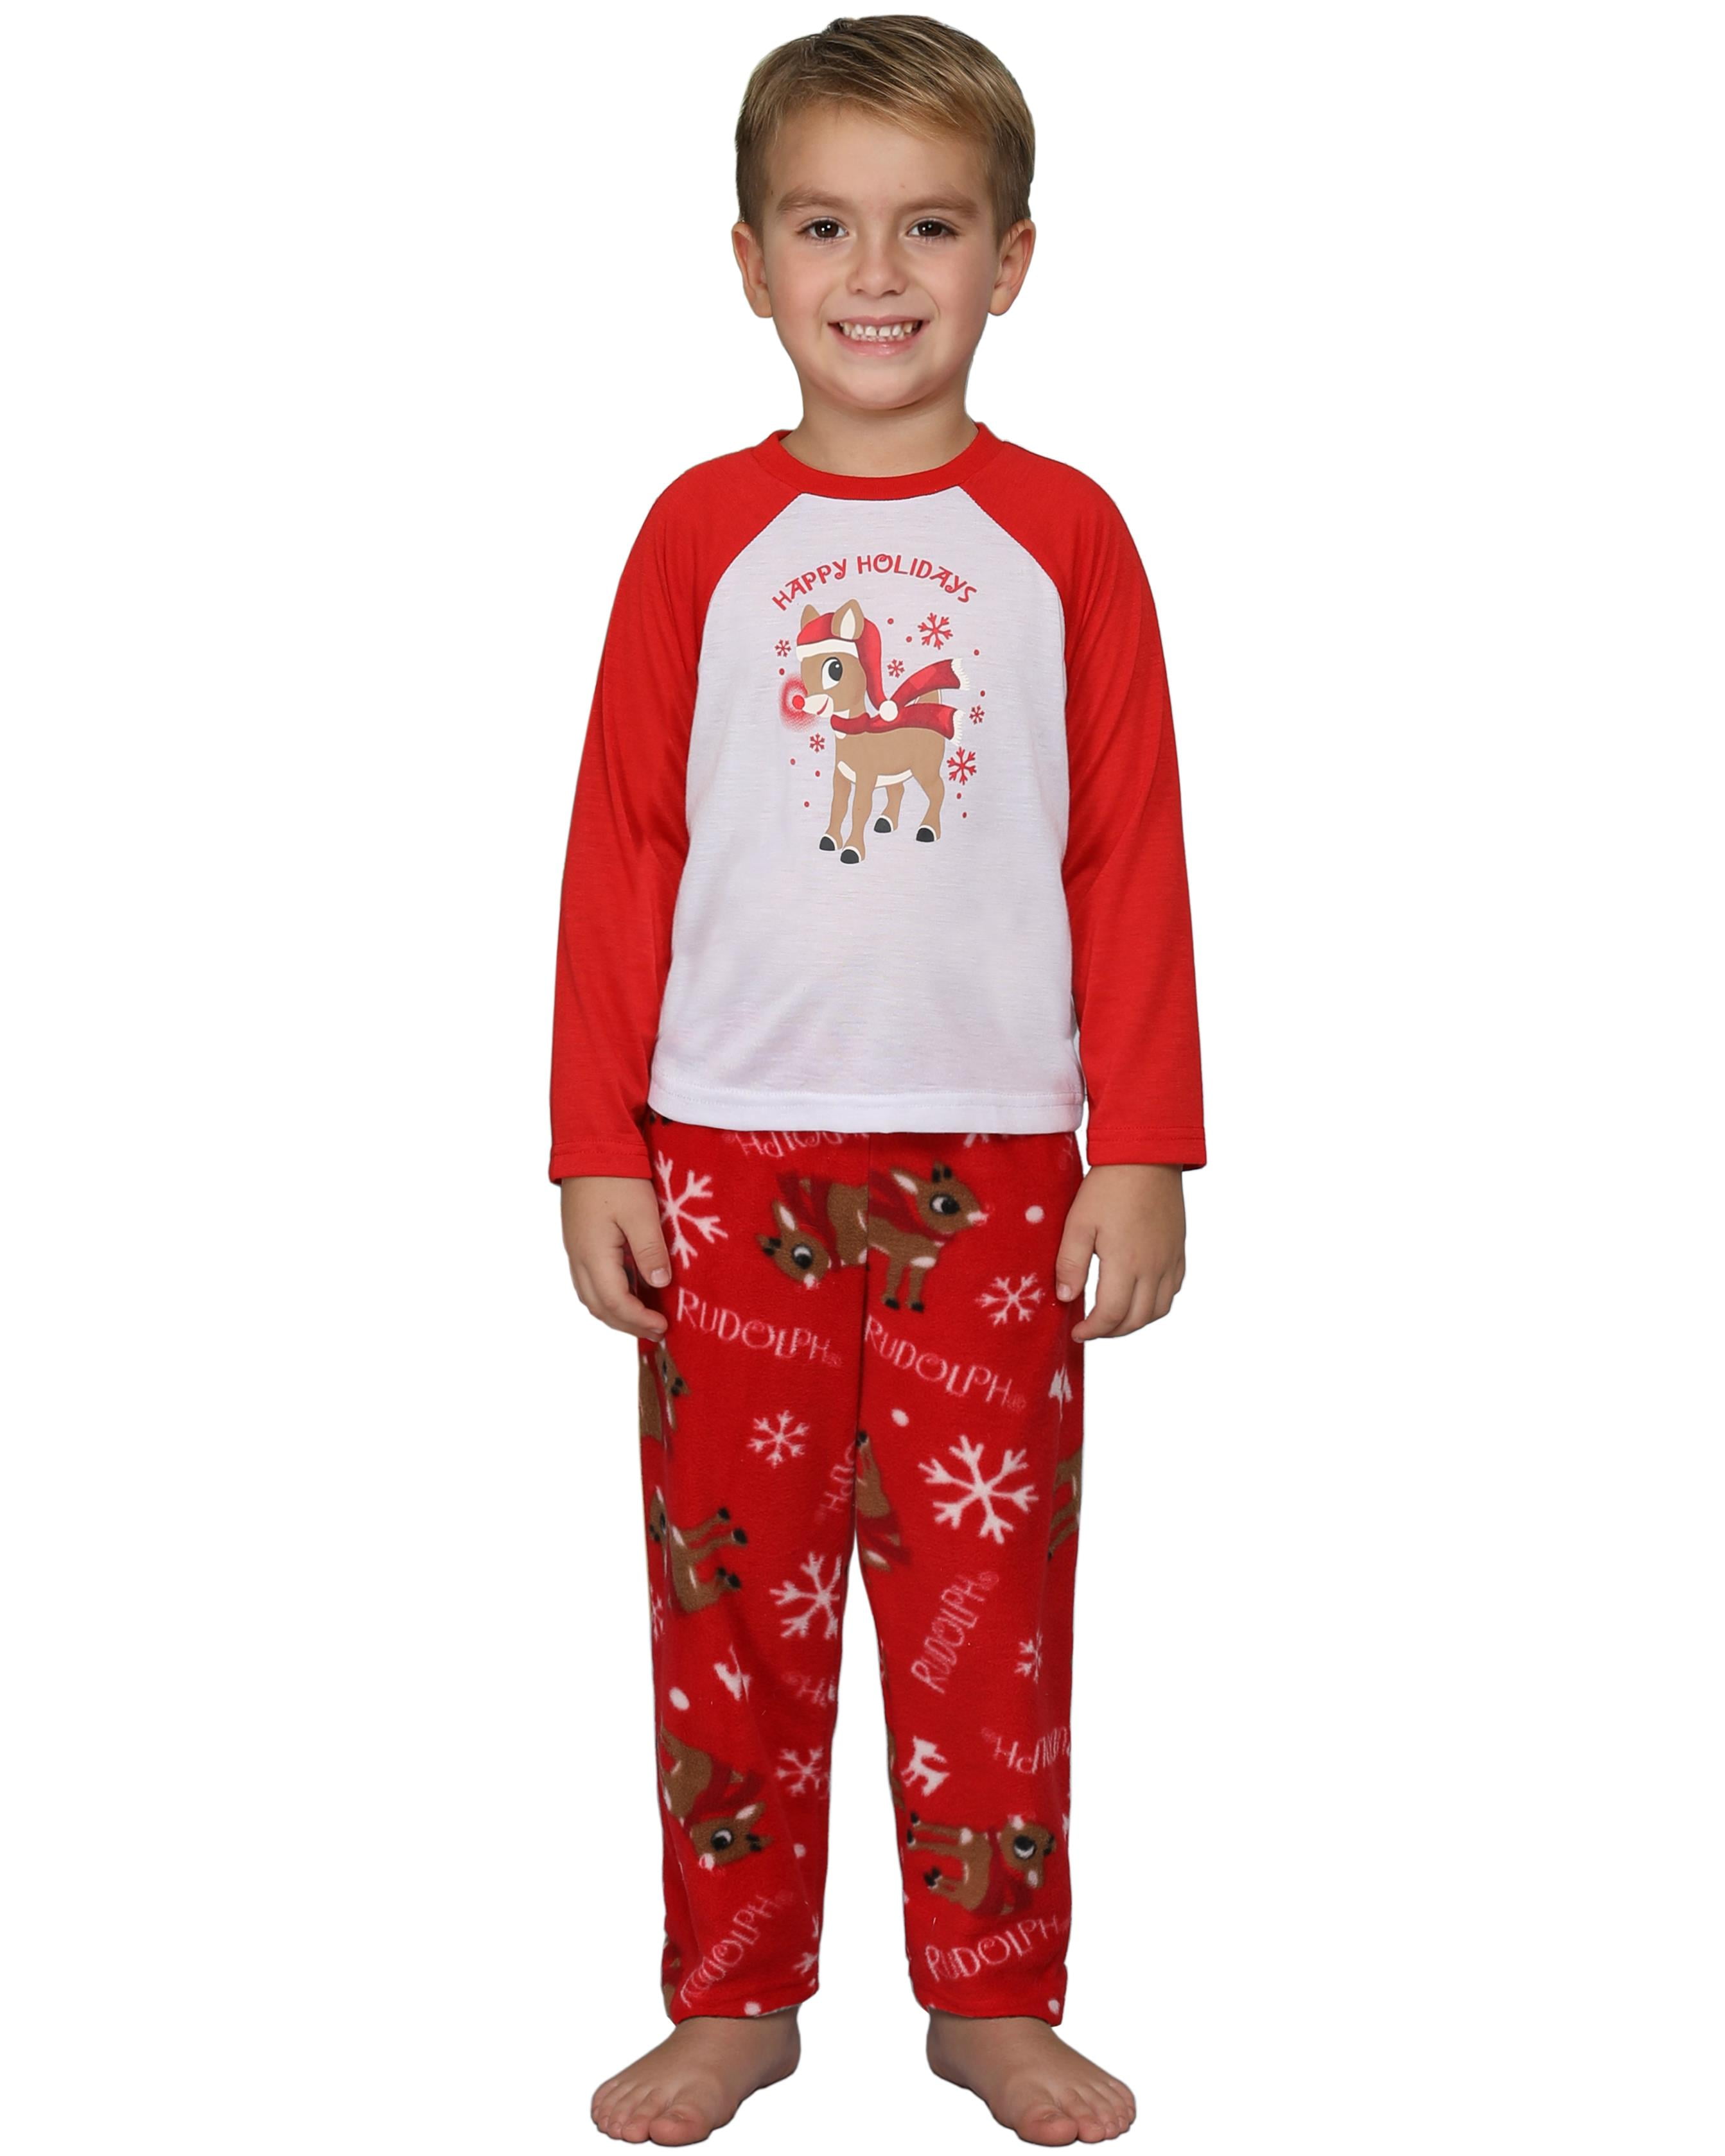 Team Rudolph Children’s size 7/8 and 18” Doll Matching lounge pants as pictured Clothing Unisex Kids Clothing Pyjamas & Robes Pyjamas 